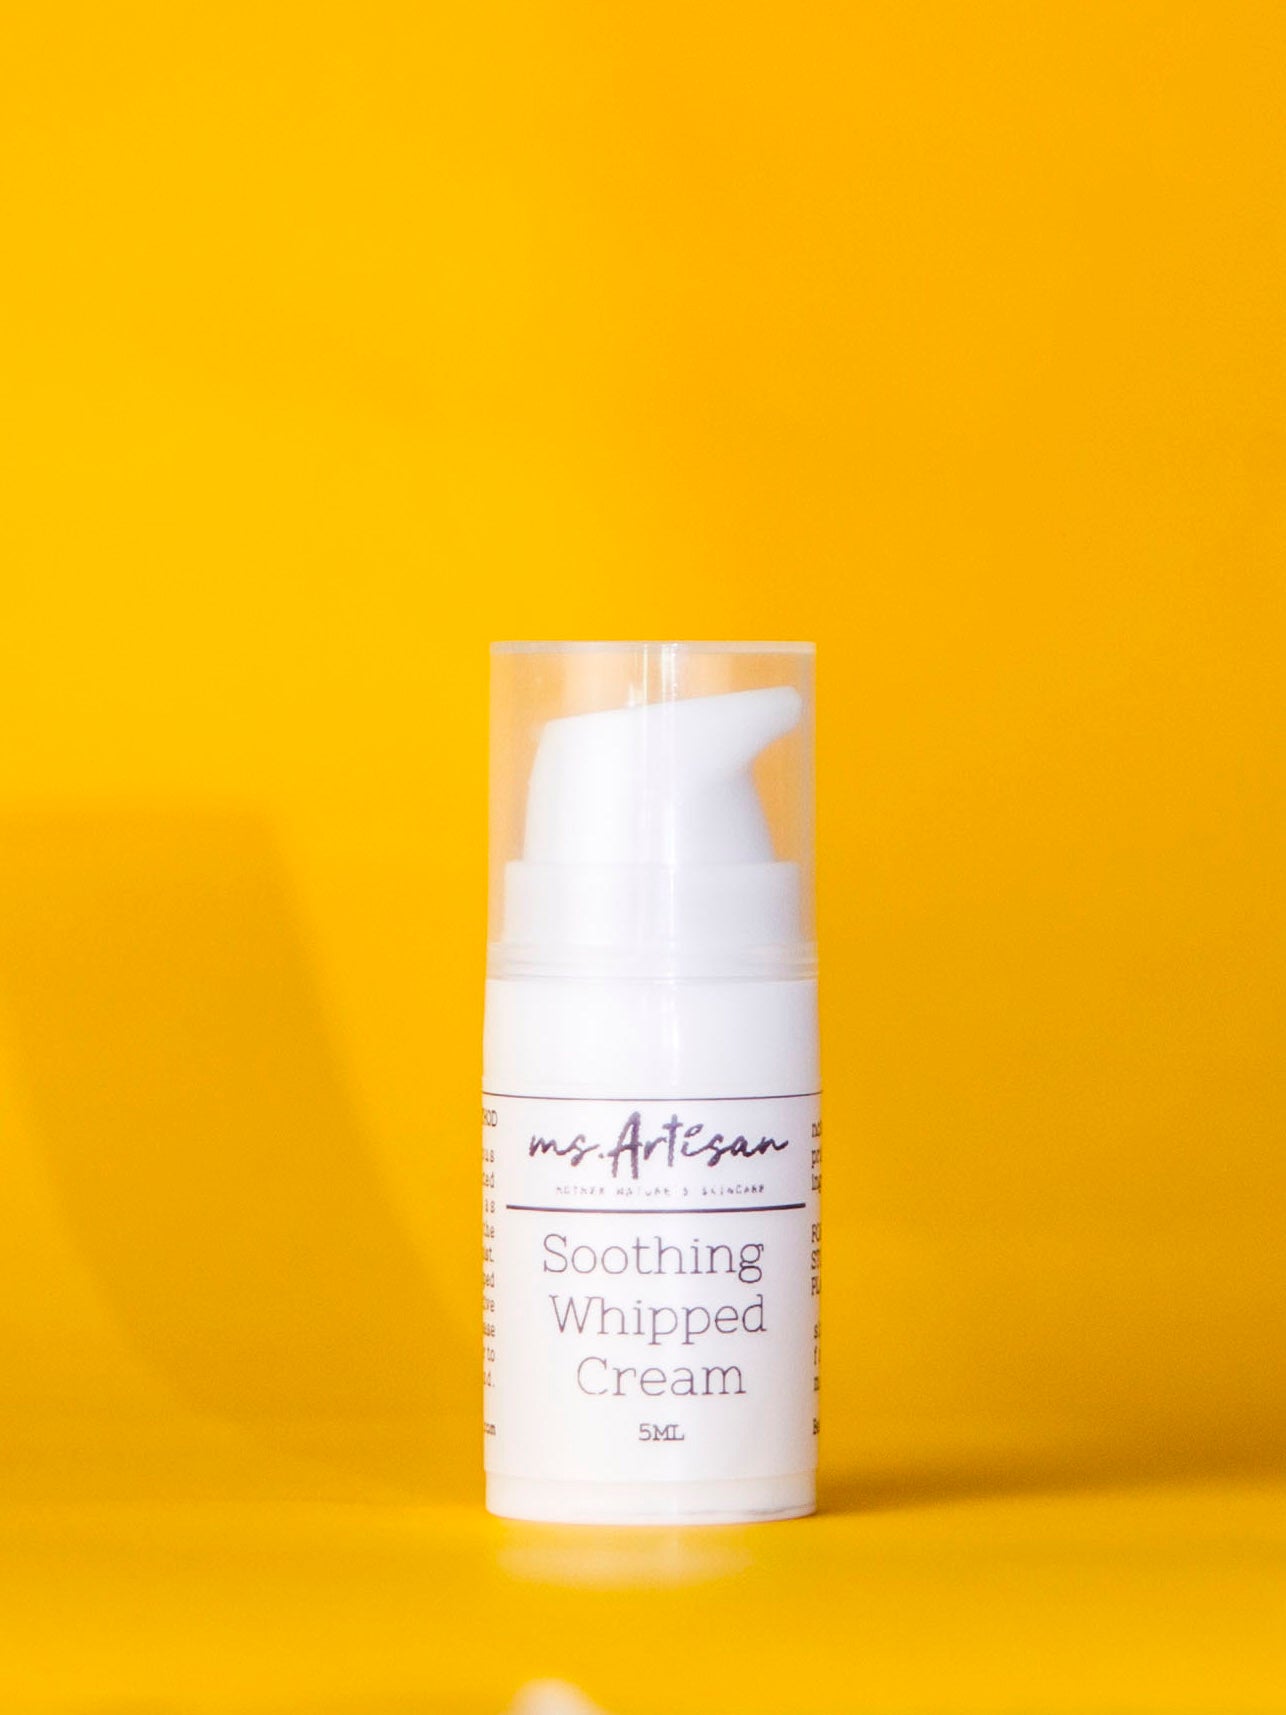 Soothing Whipped Cream (Trial bottle)